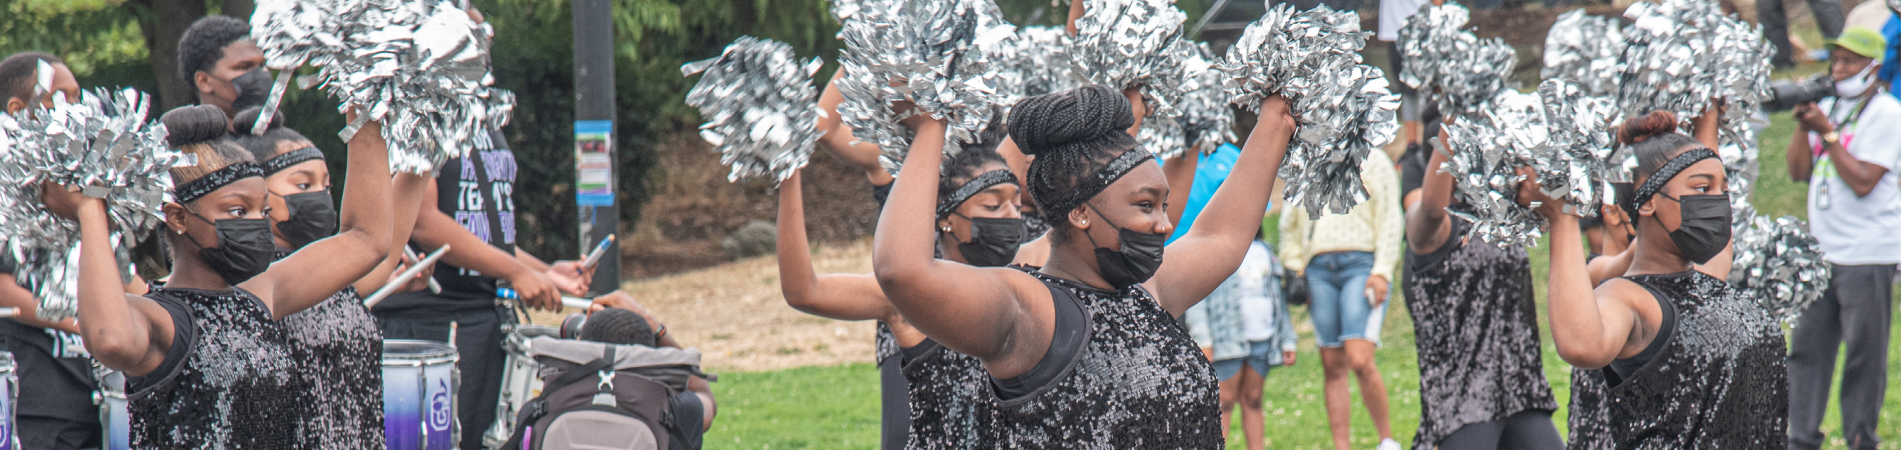 group of women dressed in black, wearing face masks and holding silver pompoms